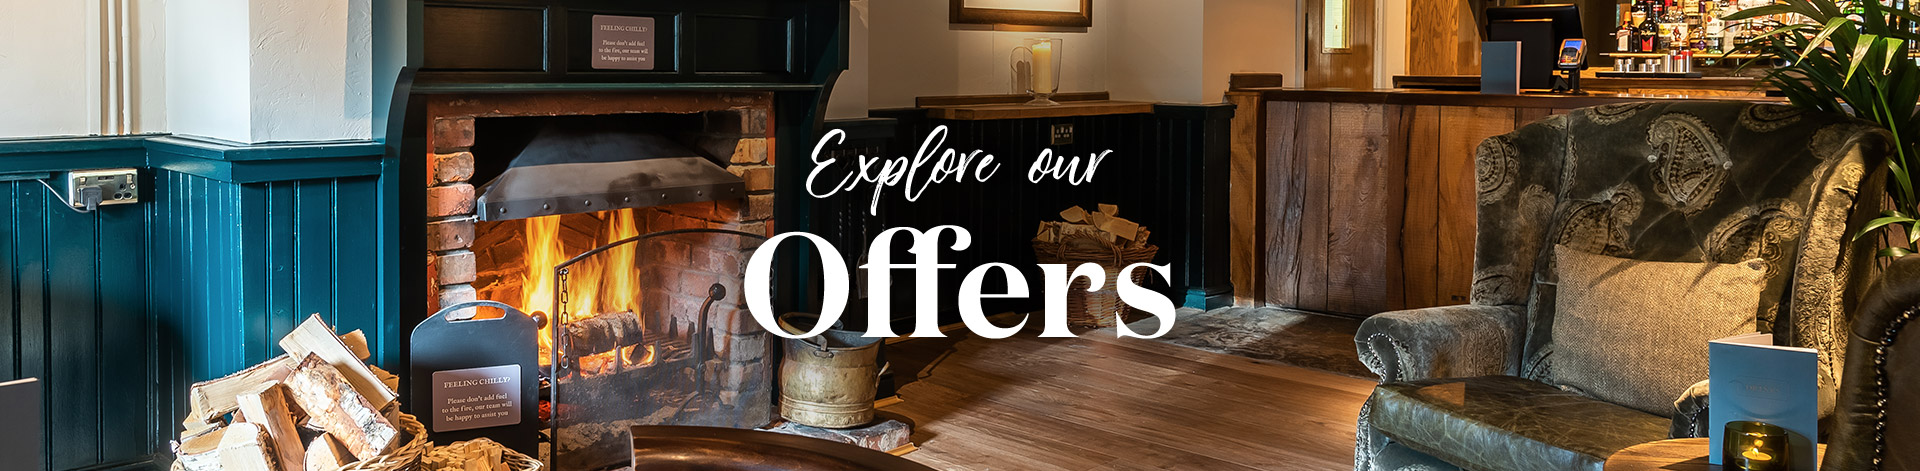 Our latest offers at The Springfield Inn